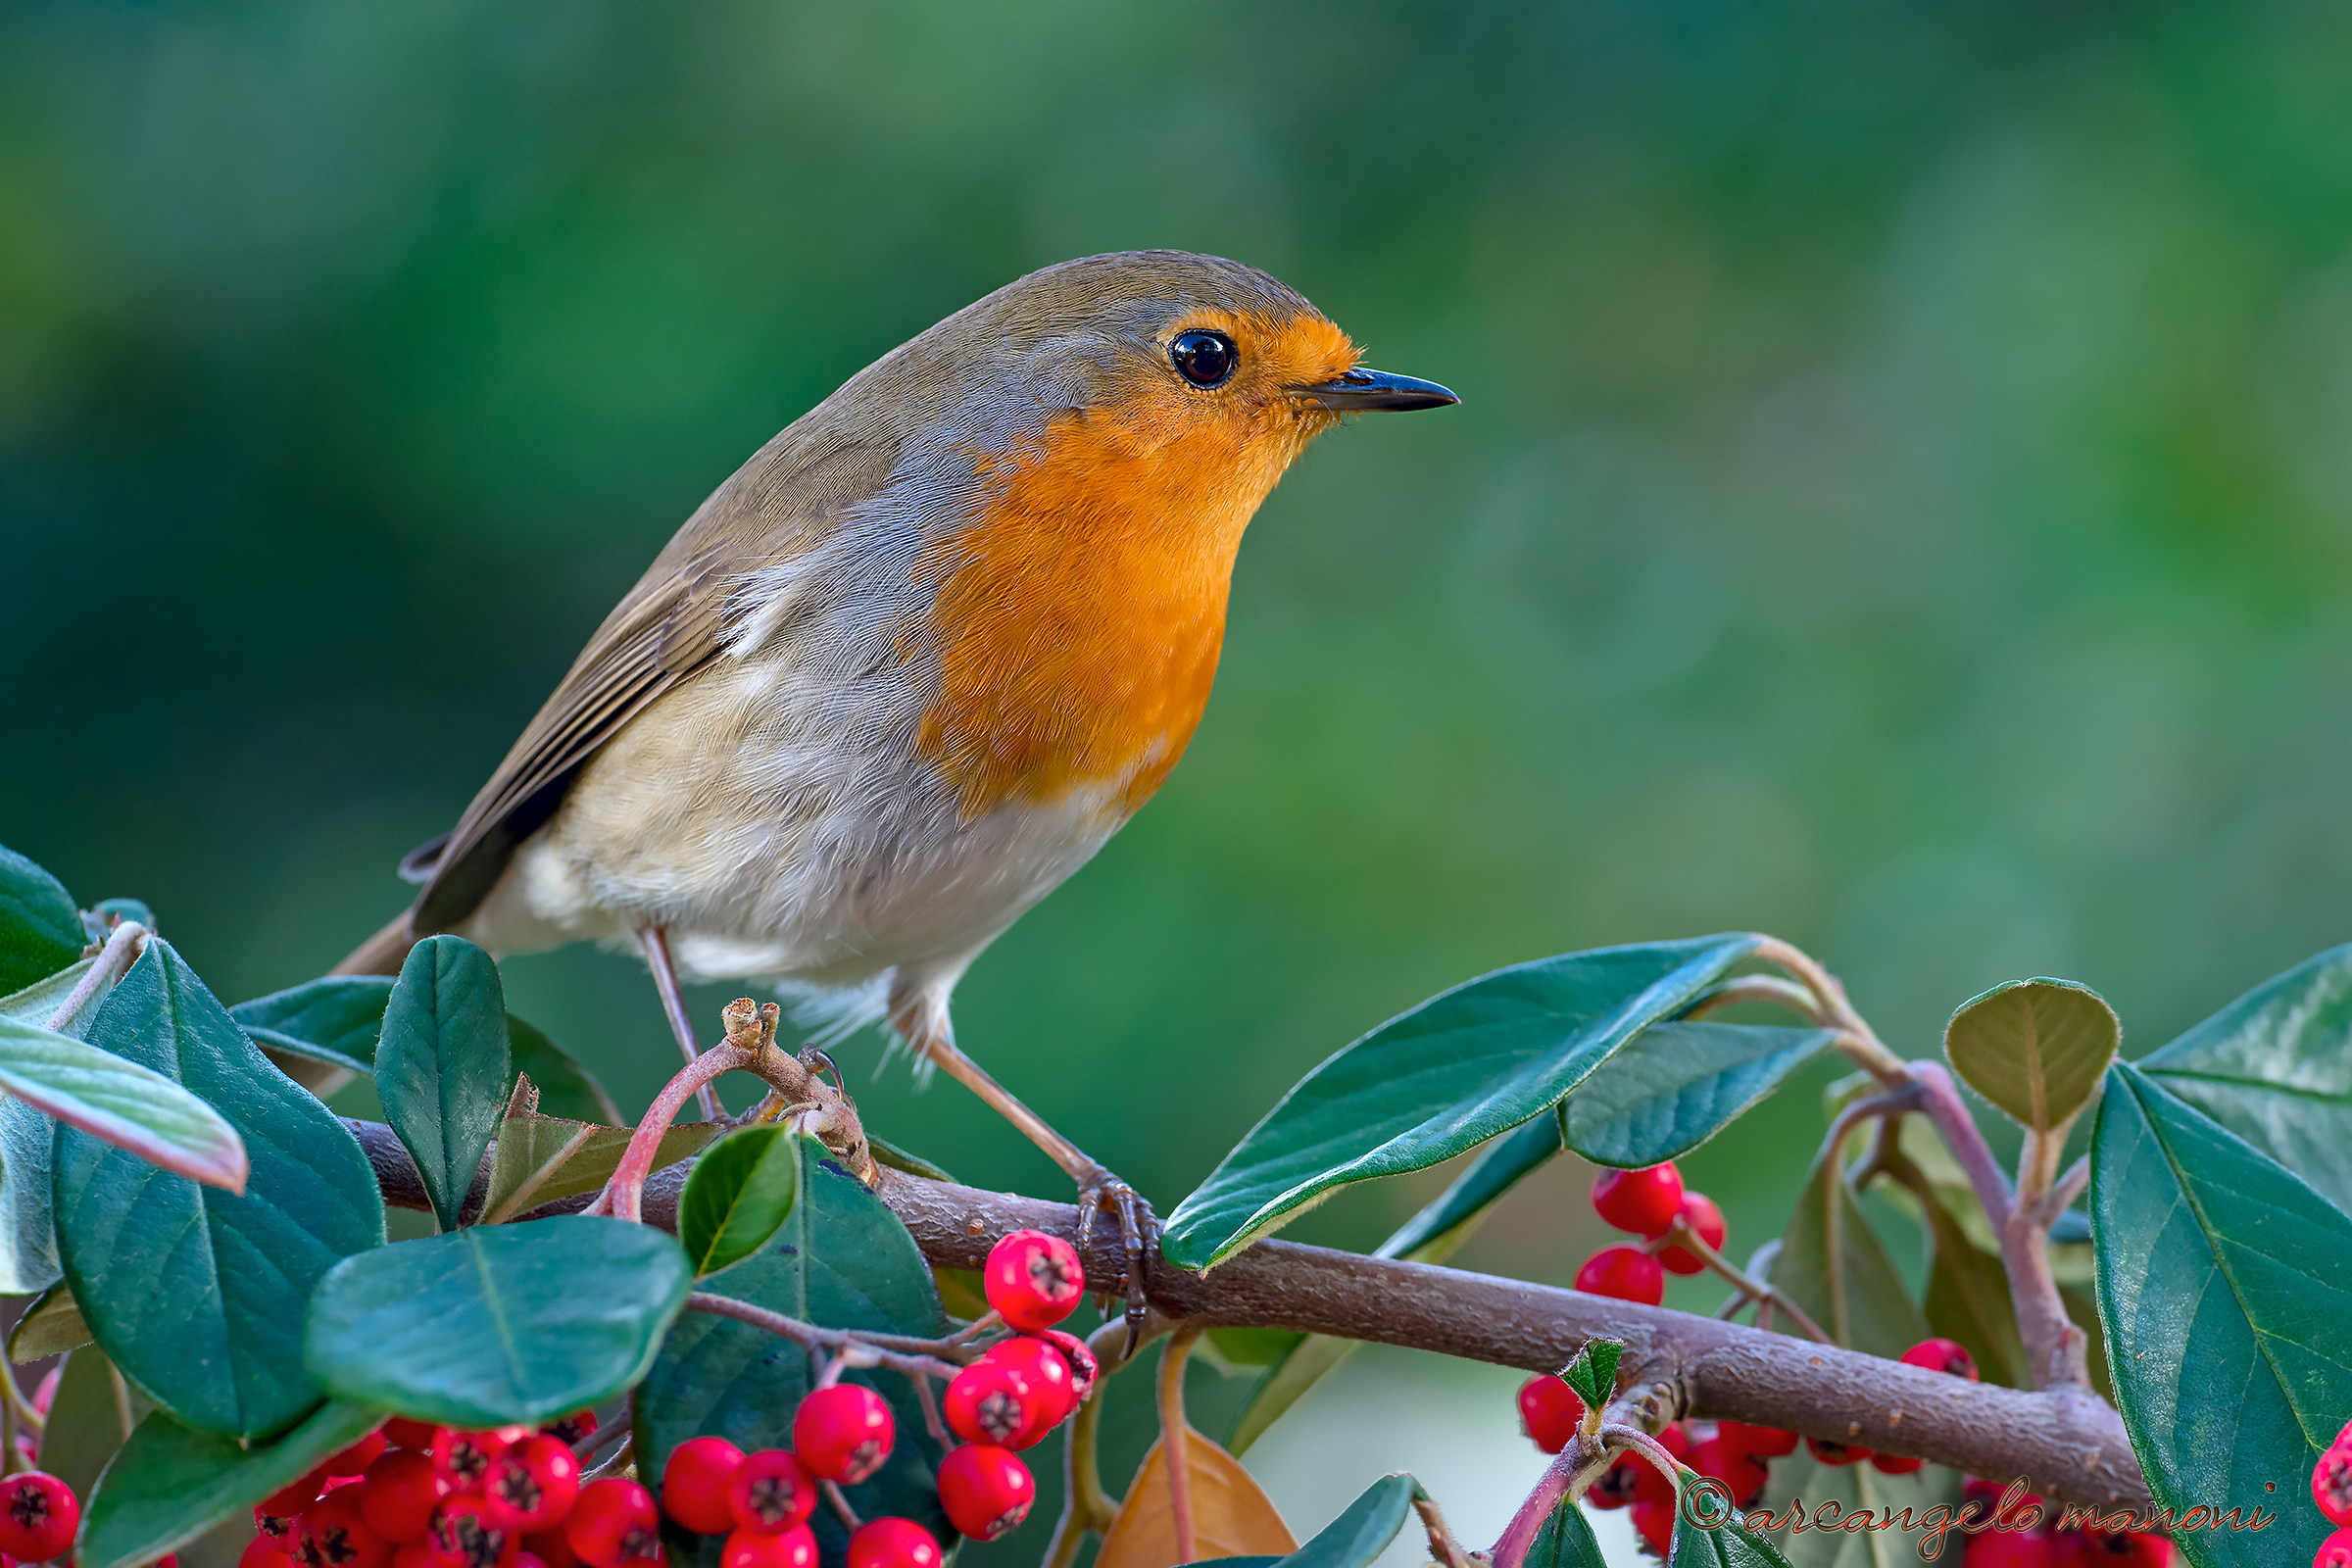 Red berries and robin...